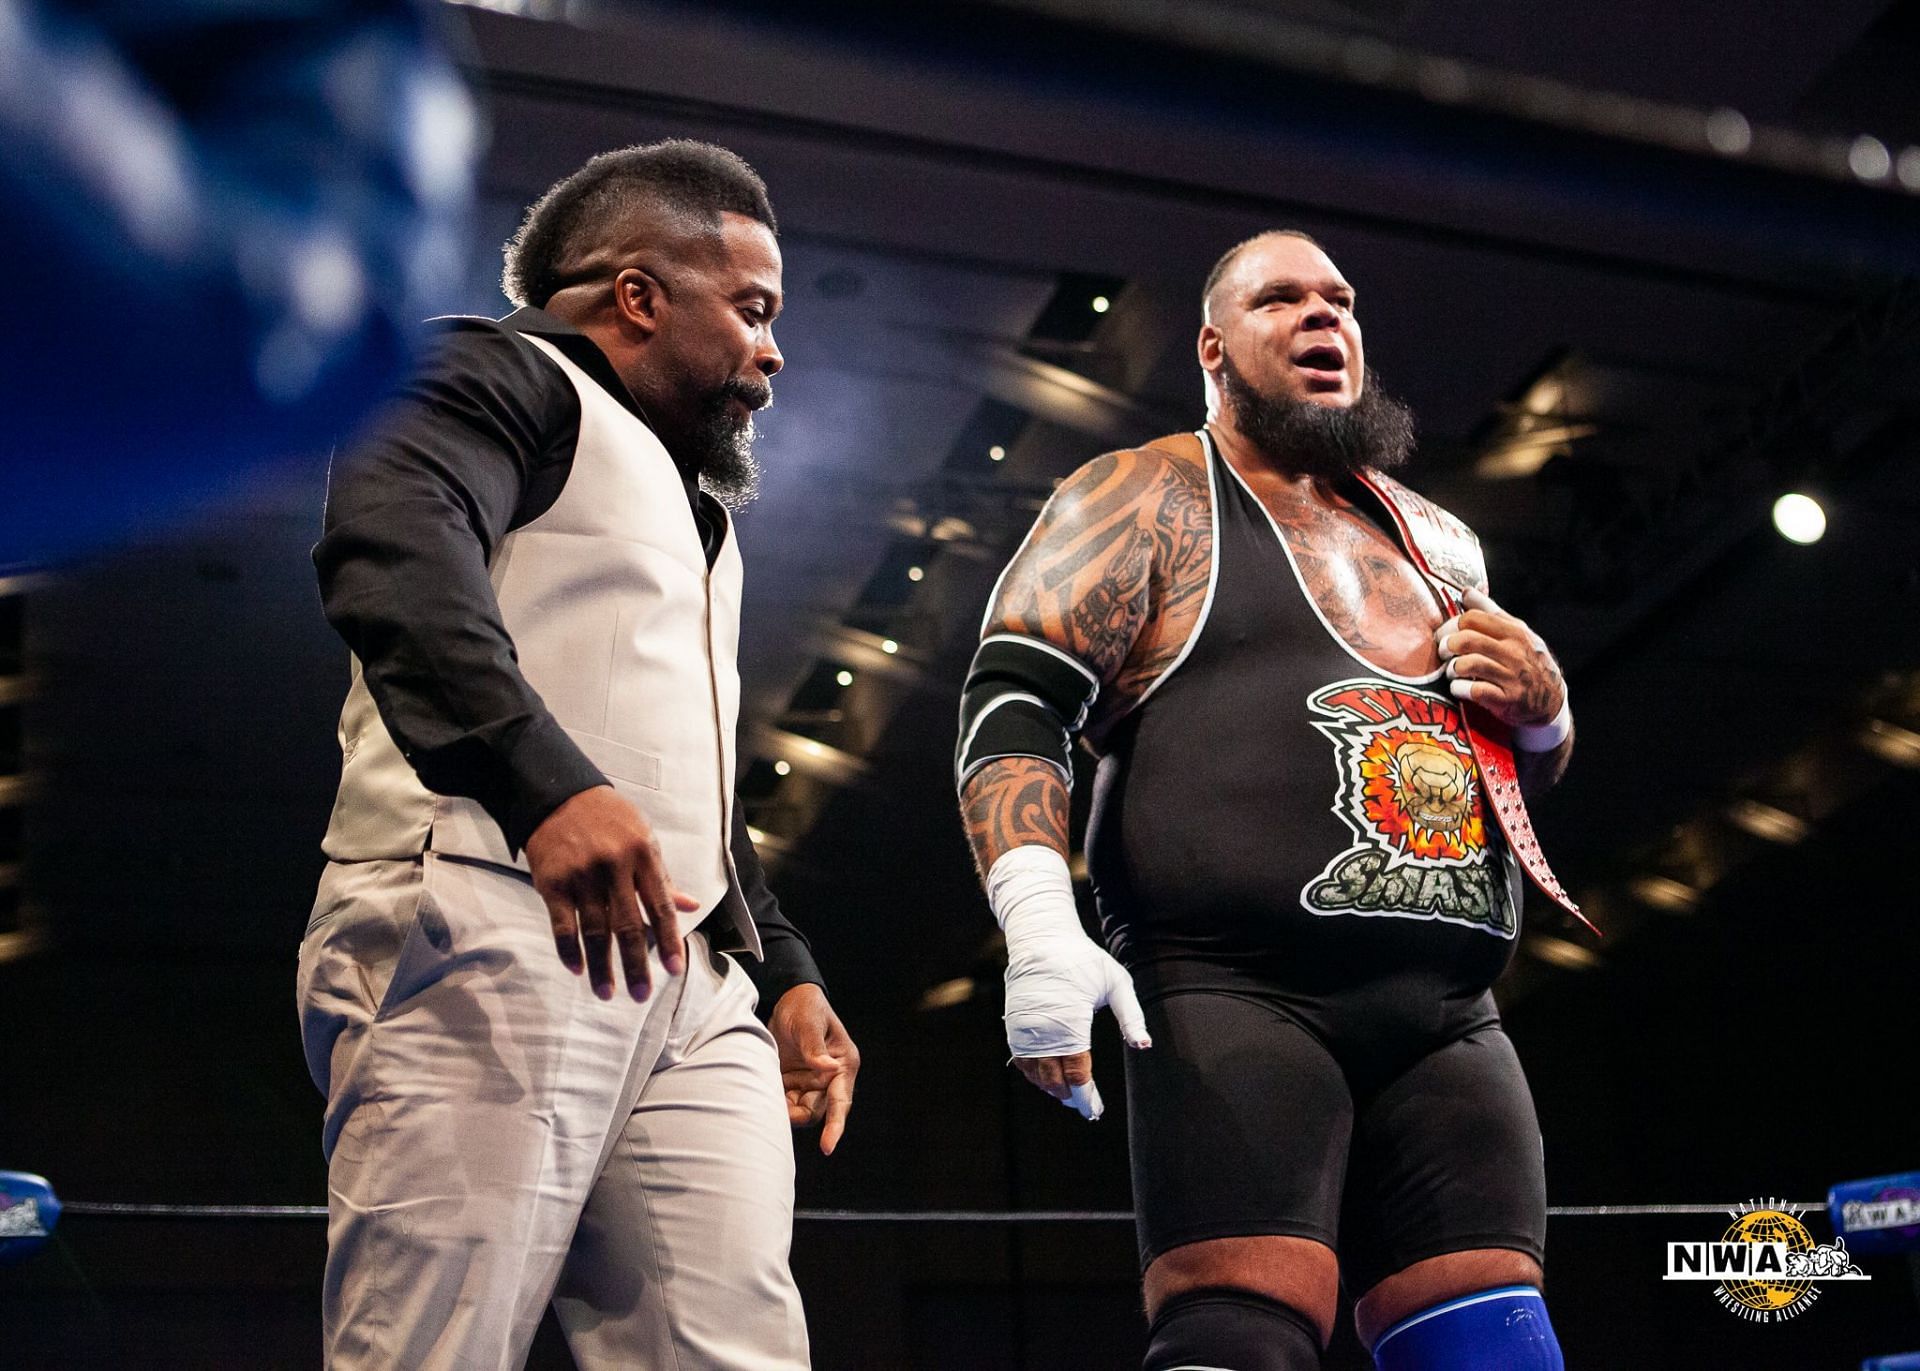 Tyrus shocked a lot of people recently by winning the NWA title